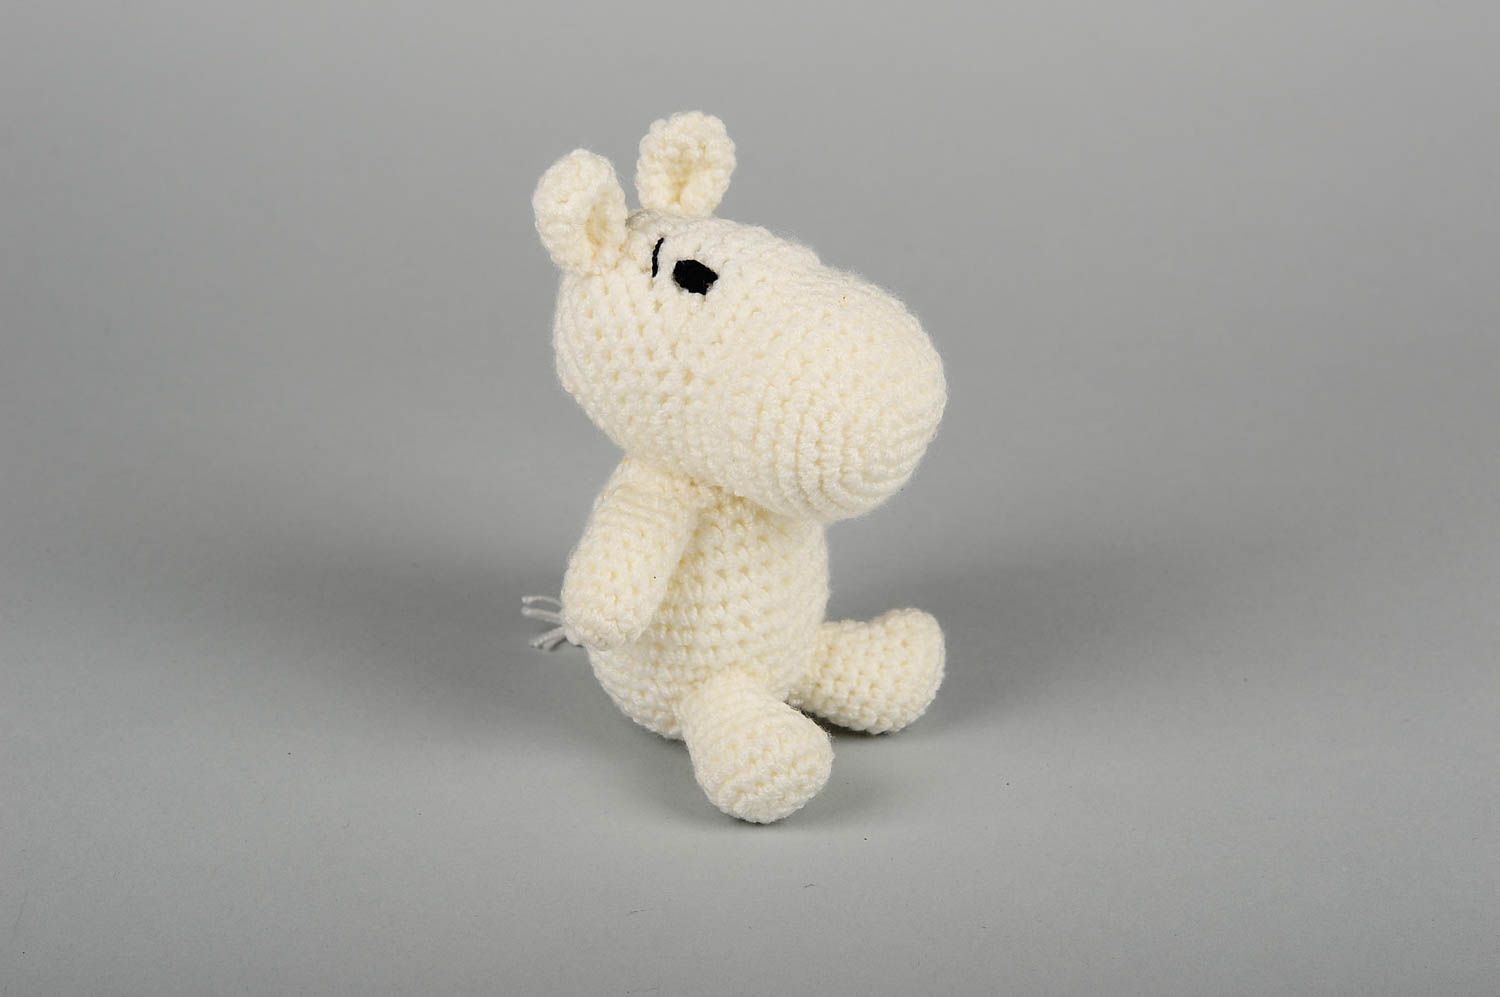 Cute toys handmade soft toy crochet ideas interior decorating gifts for kids photo 3